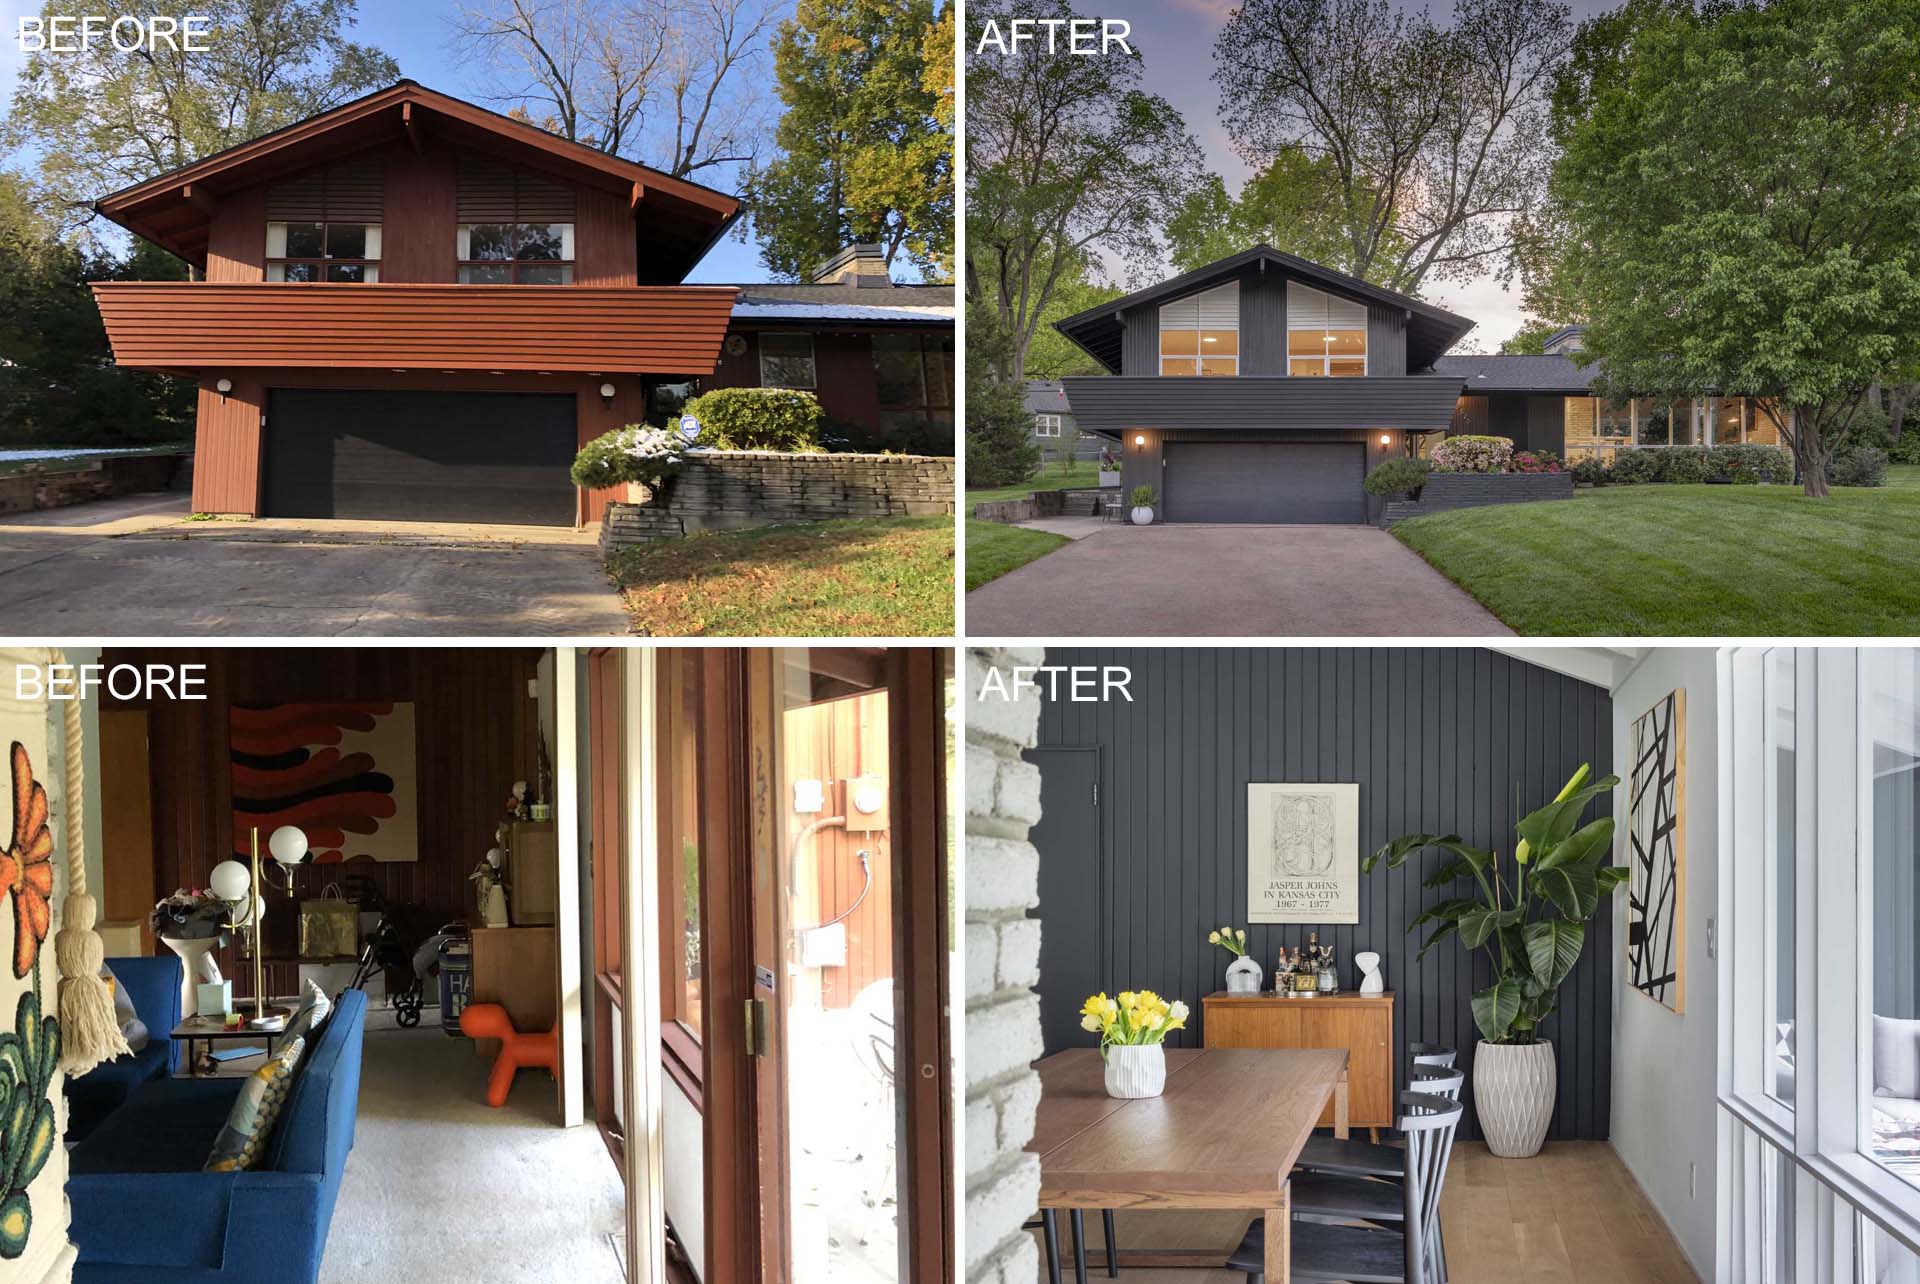 Before & After - A mid-century modern renovation with a new dark exterior and bright interior.